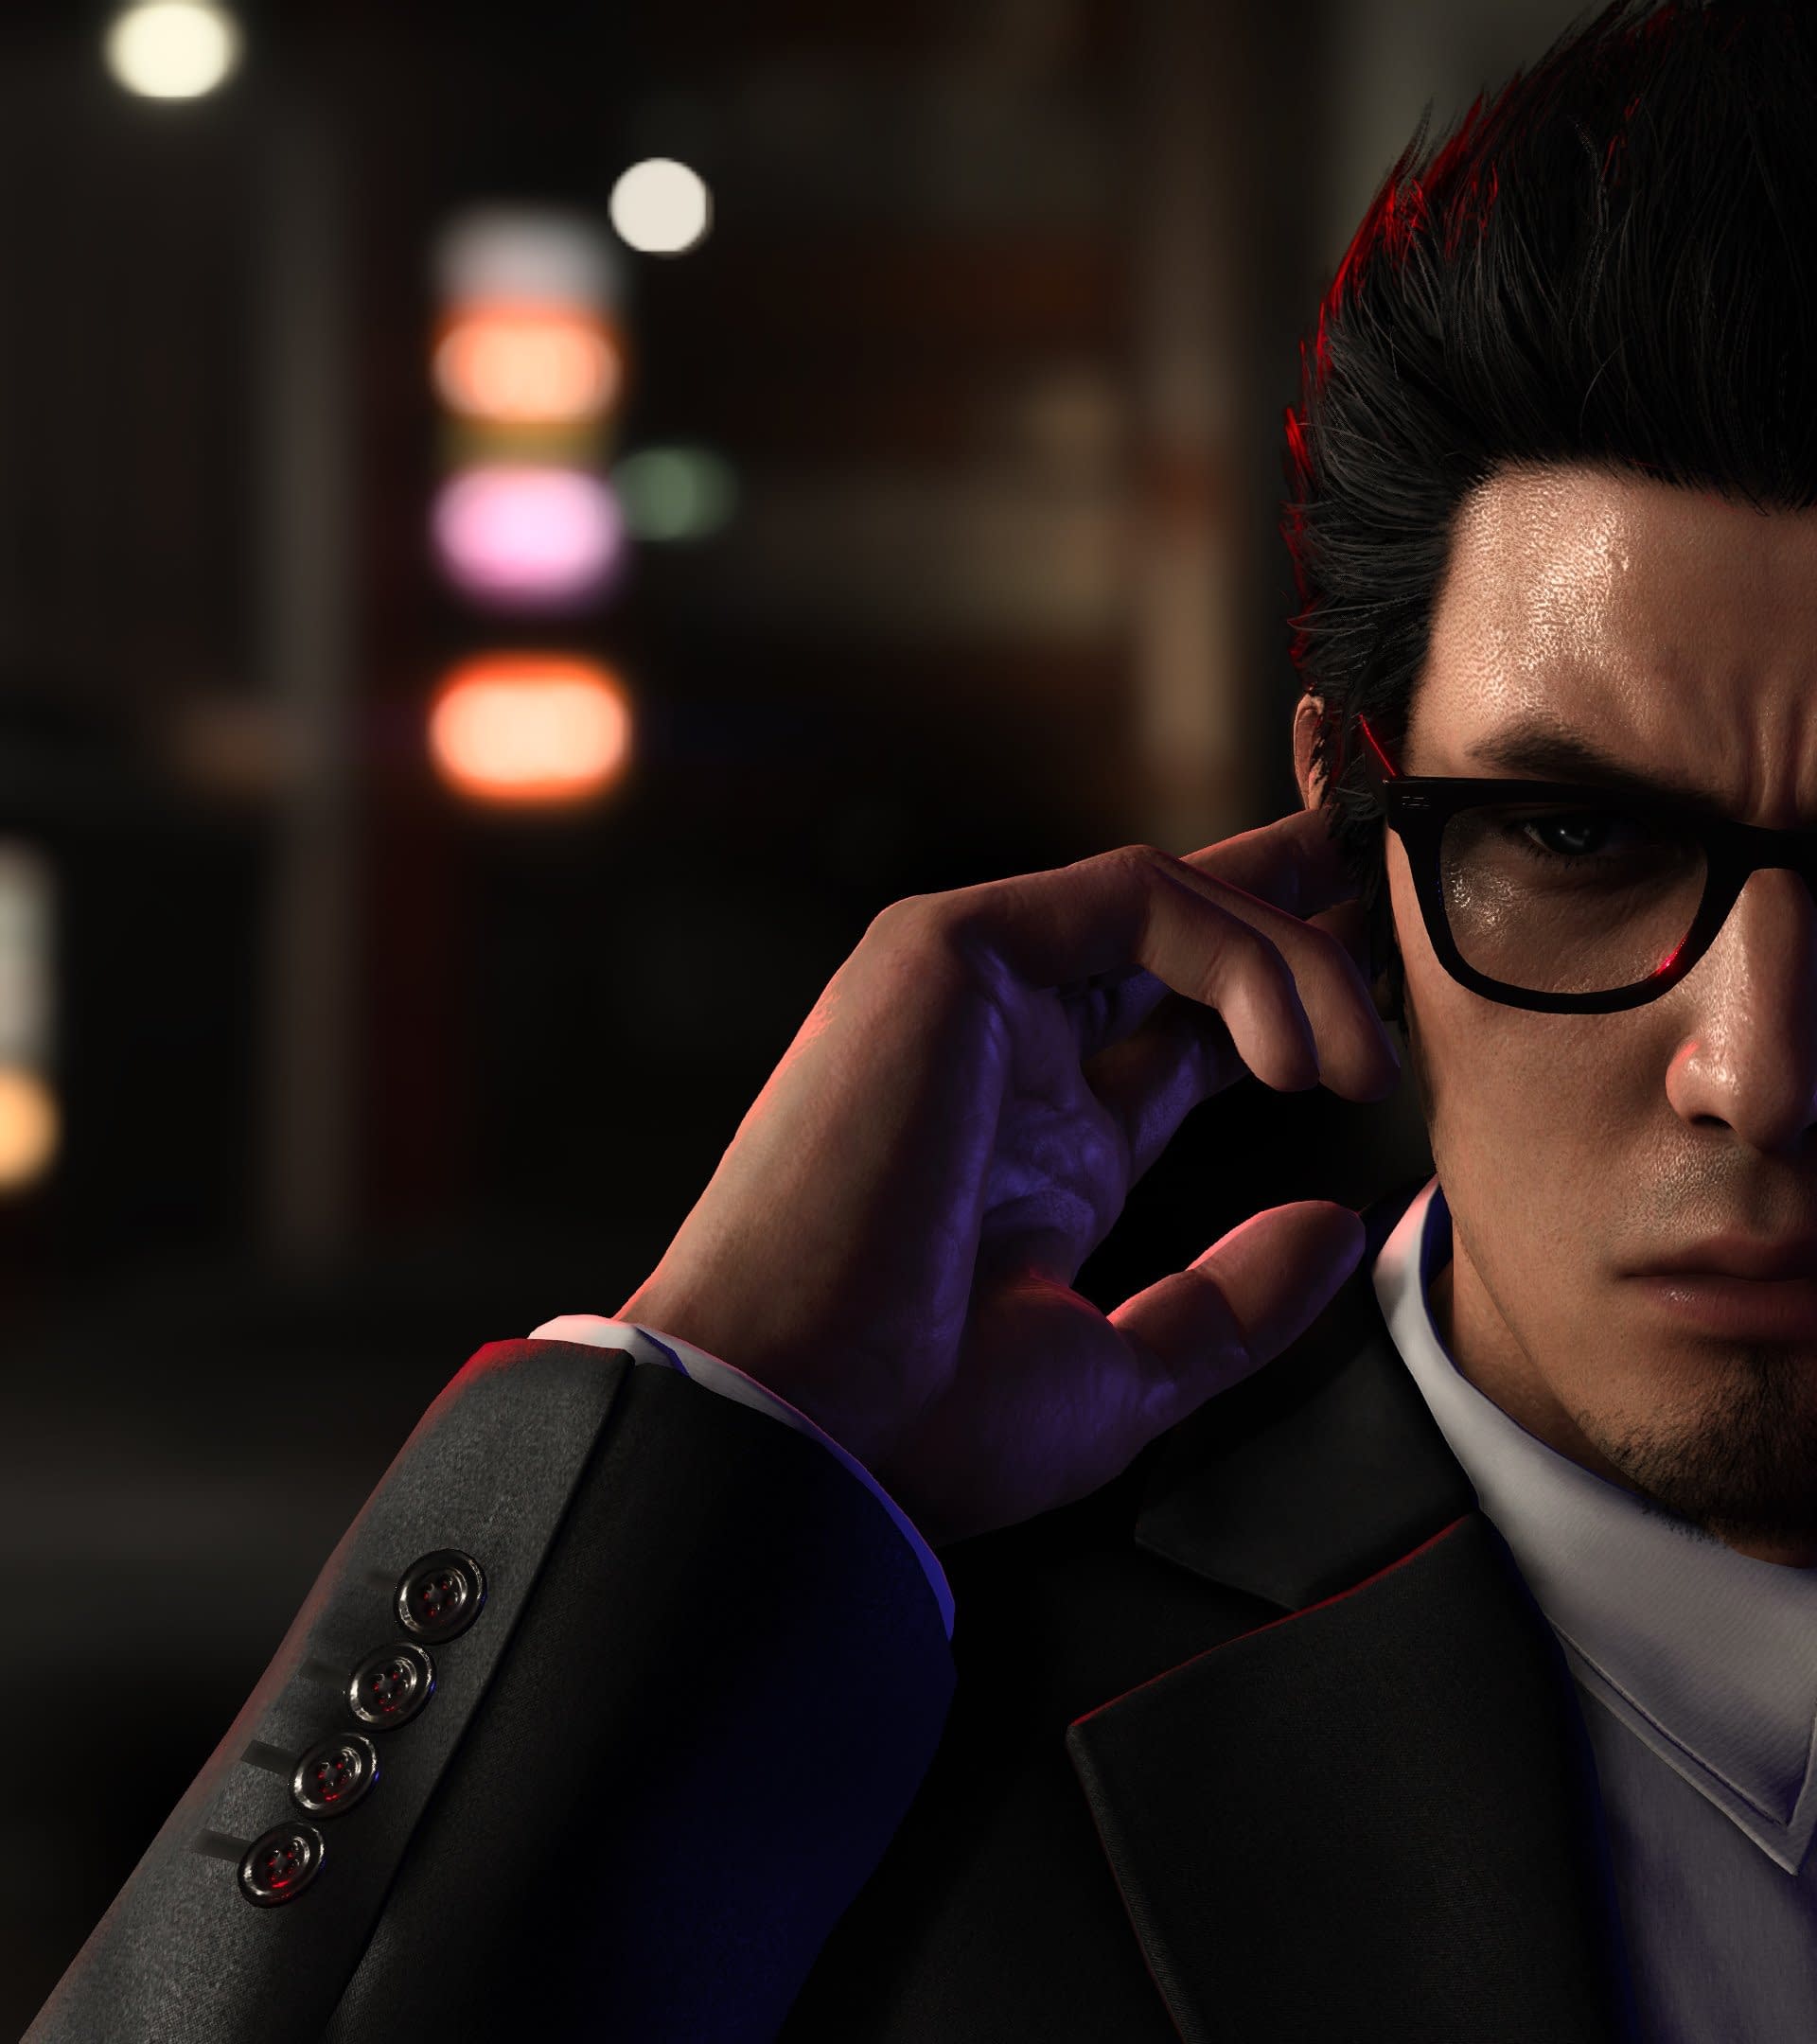 The Side Game of Yakuza Series Comes: Release Date, Display Images